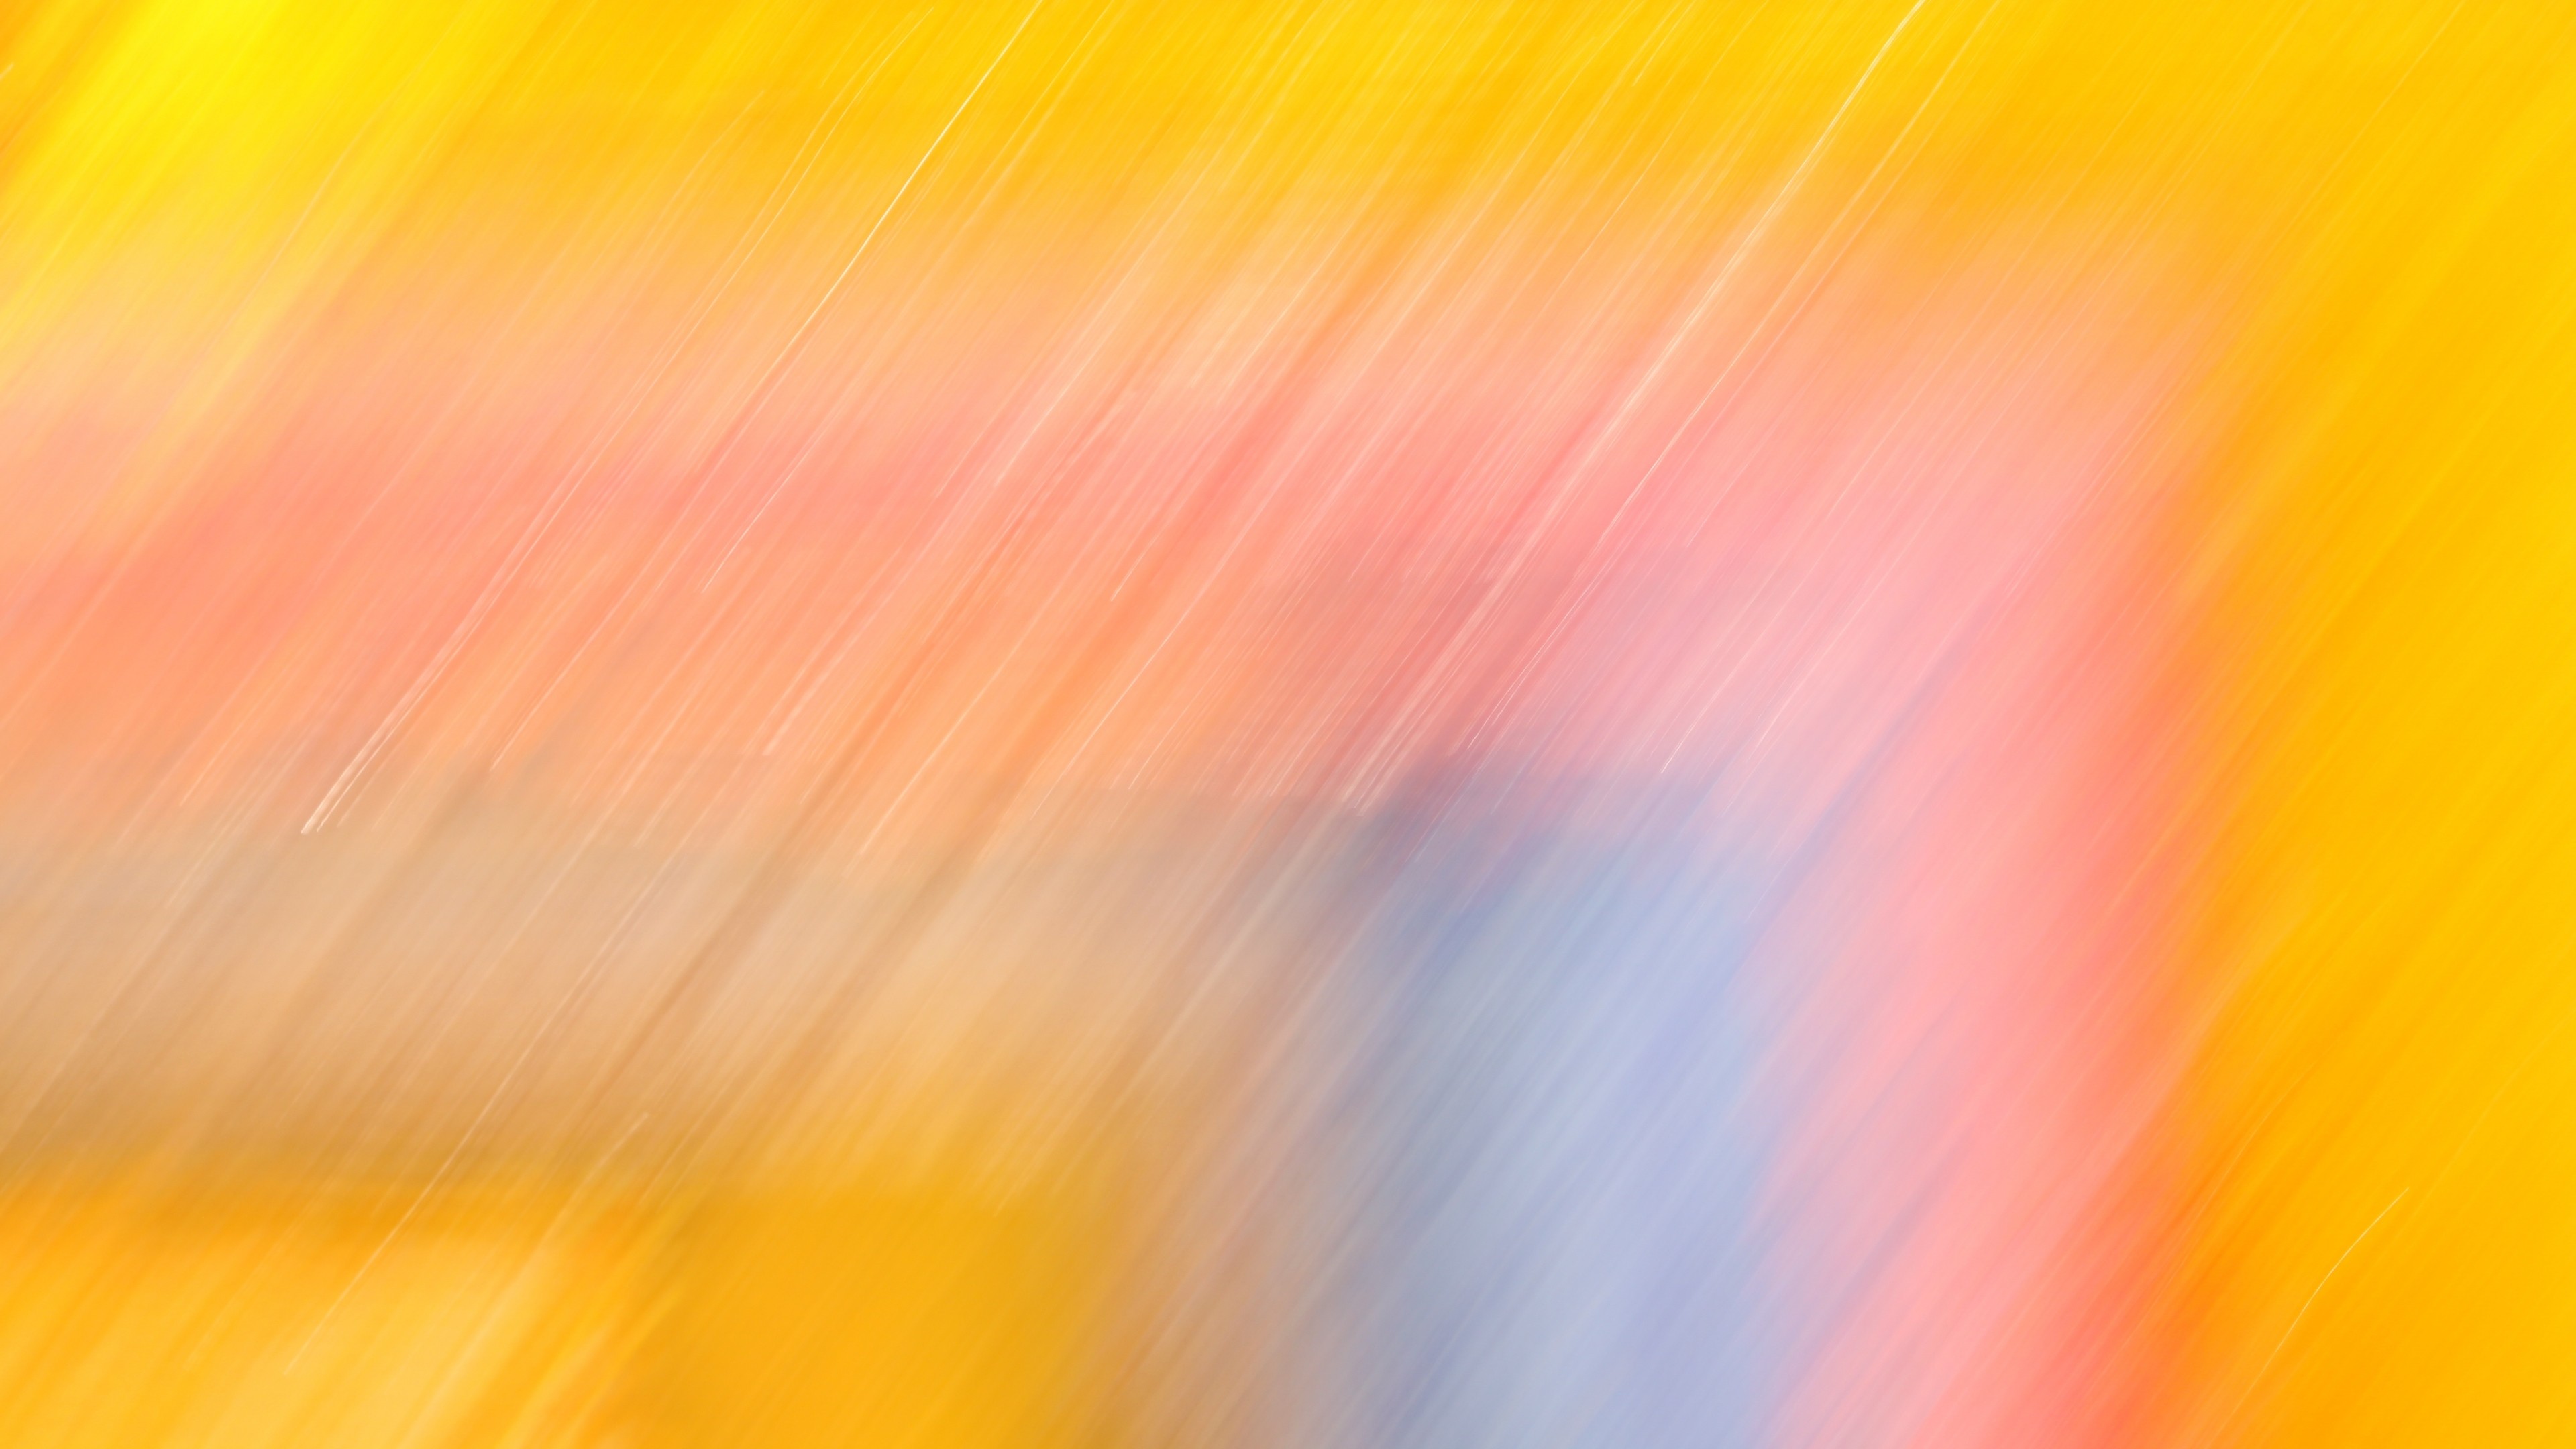 3840x2160 Yellow Bright Abstract Lines 4k